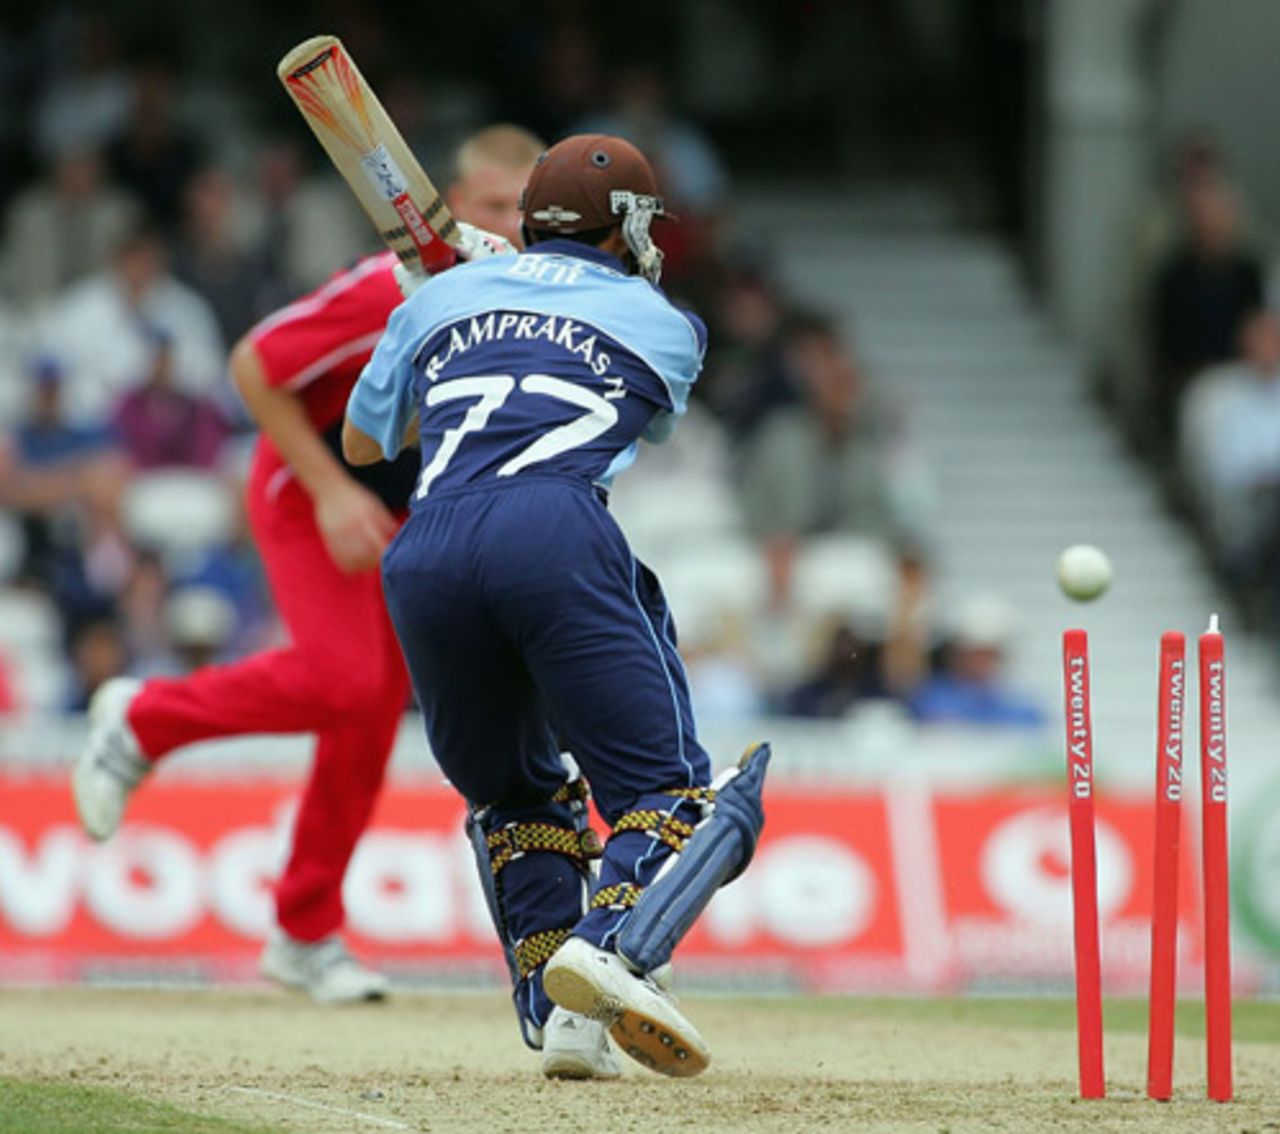 Mark Ramprakash is bowled by Andrew Flintoff to end Surrey's hopes of reaching the 2005 Twenty20 Final, Lancashire v Surrey, The Oval, July 30, 2005